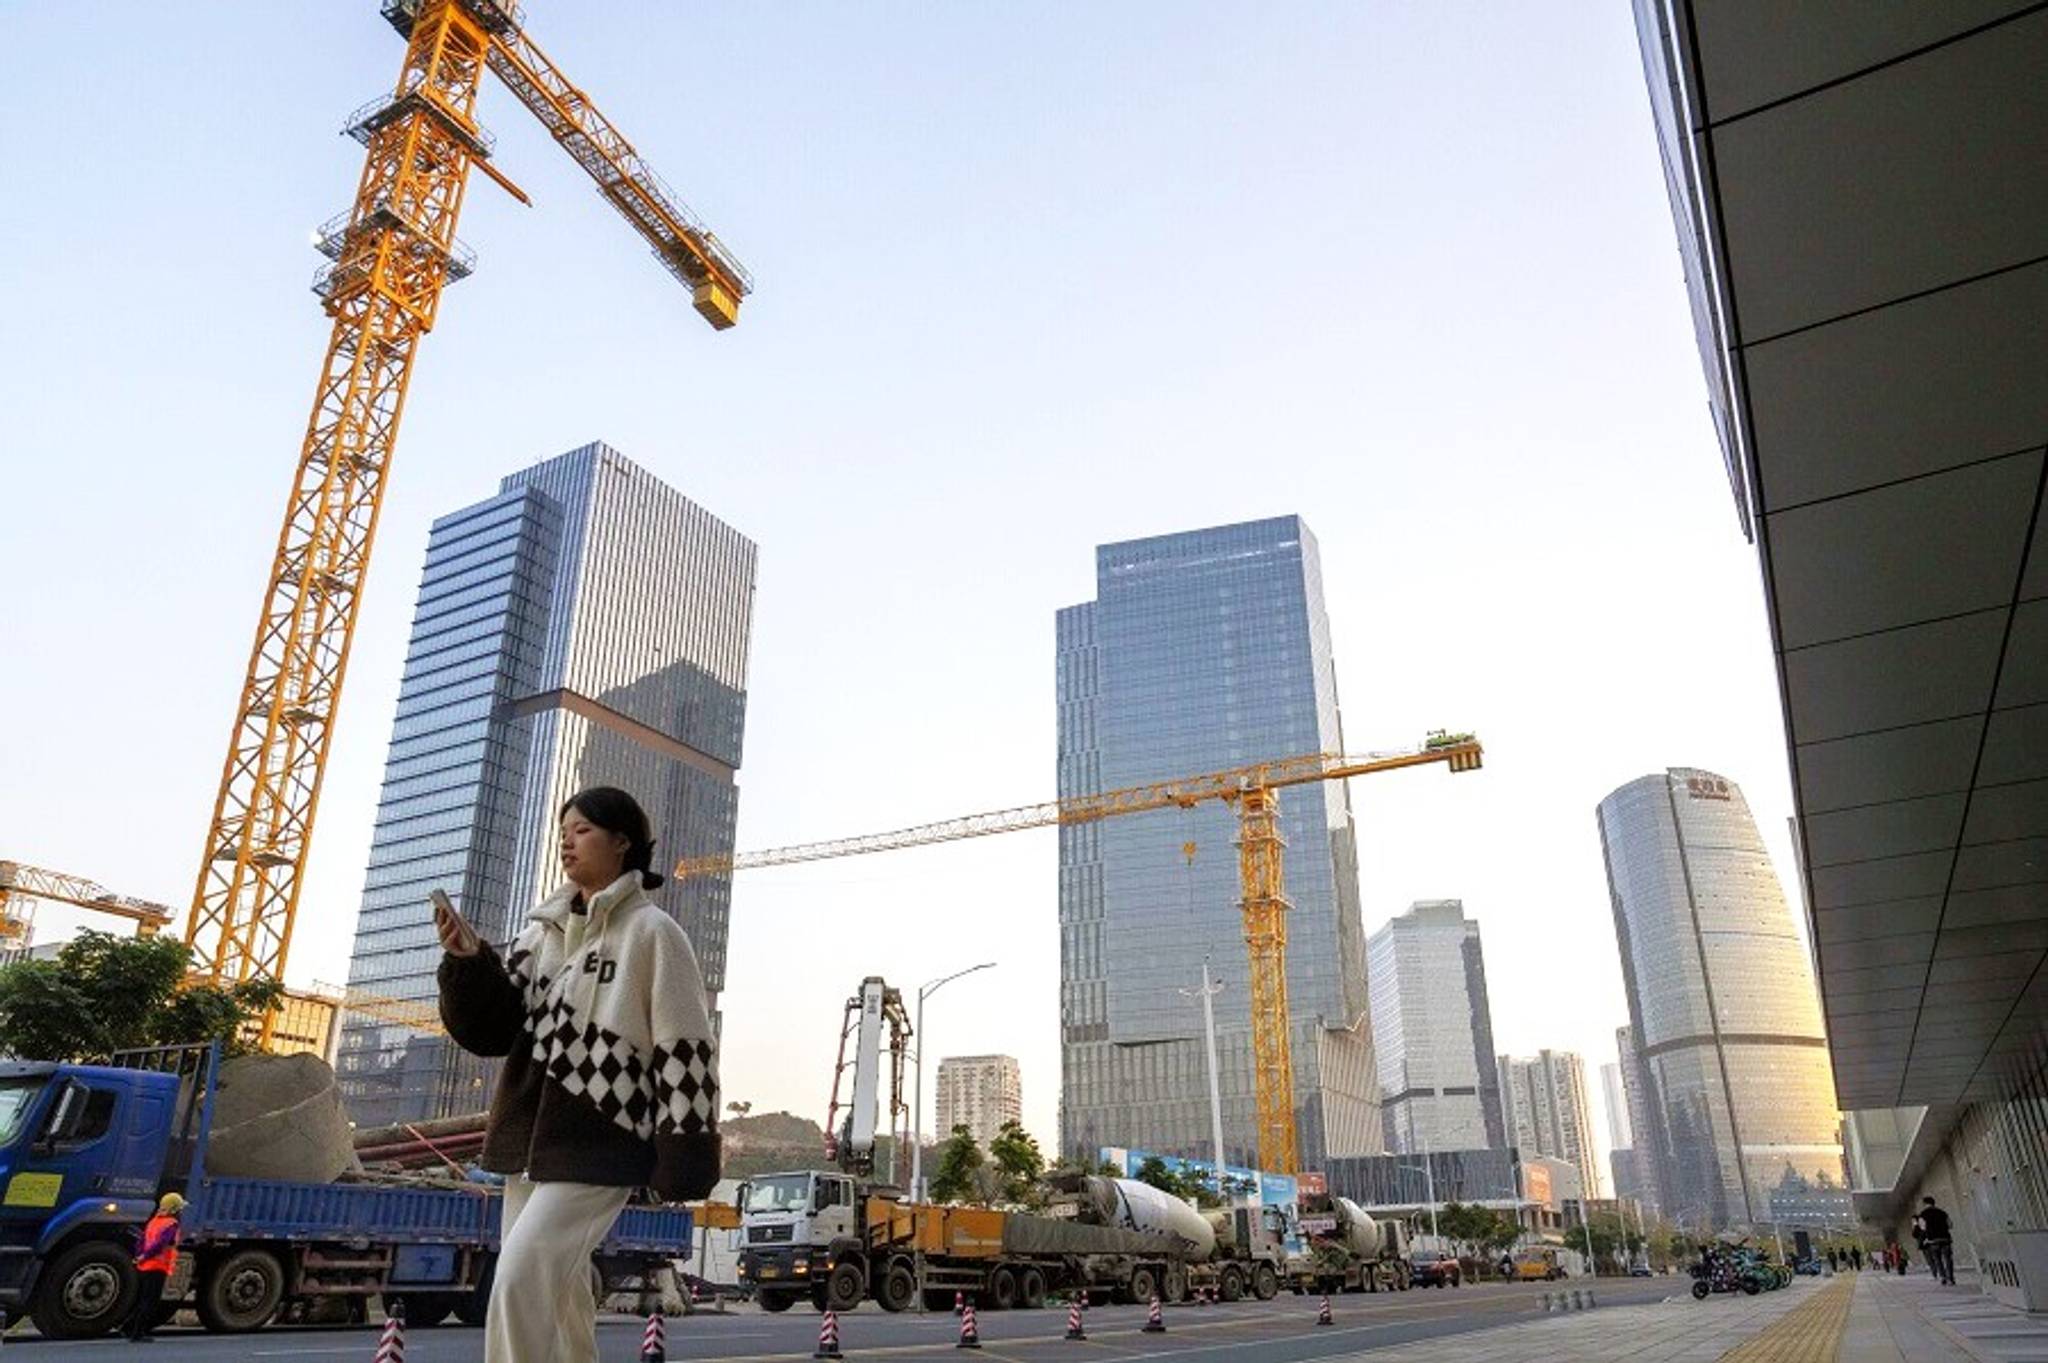 Young Chinese people resort to ‘refined poverty’ amid housing crisis